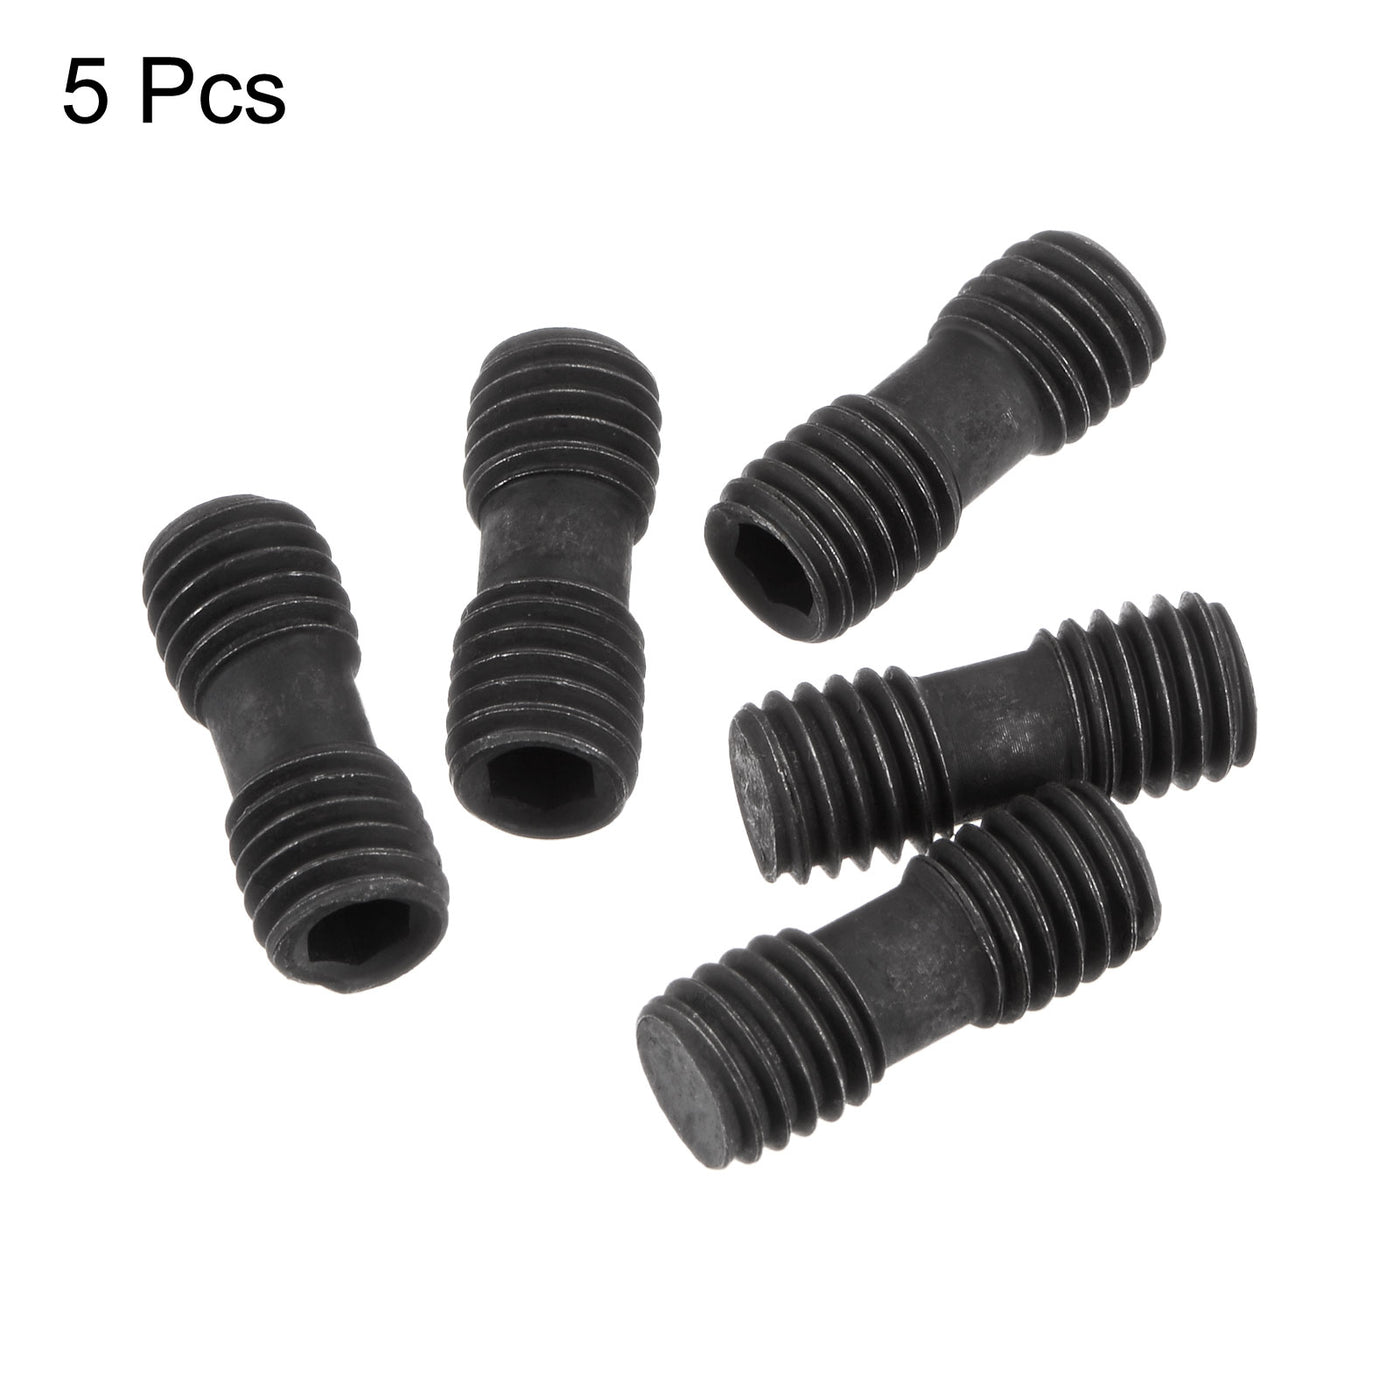 Uxcell Uxcell M8-1.25x20 Hex Head Set Screws for CNC Lathe Turning Tool Holder, 5Pcs